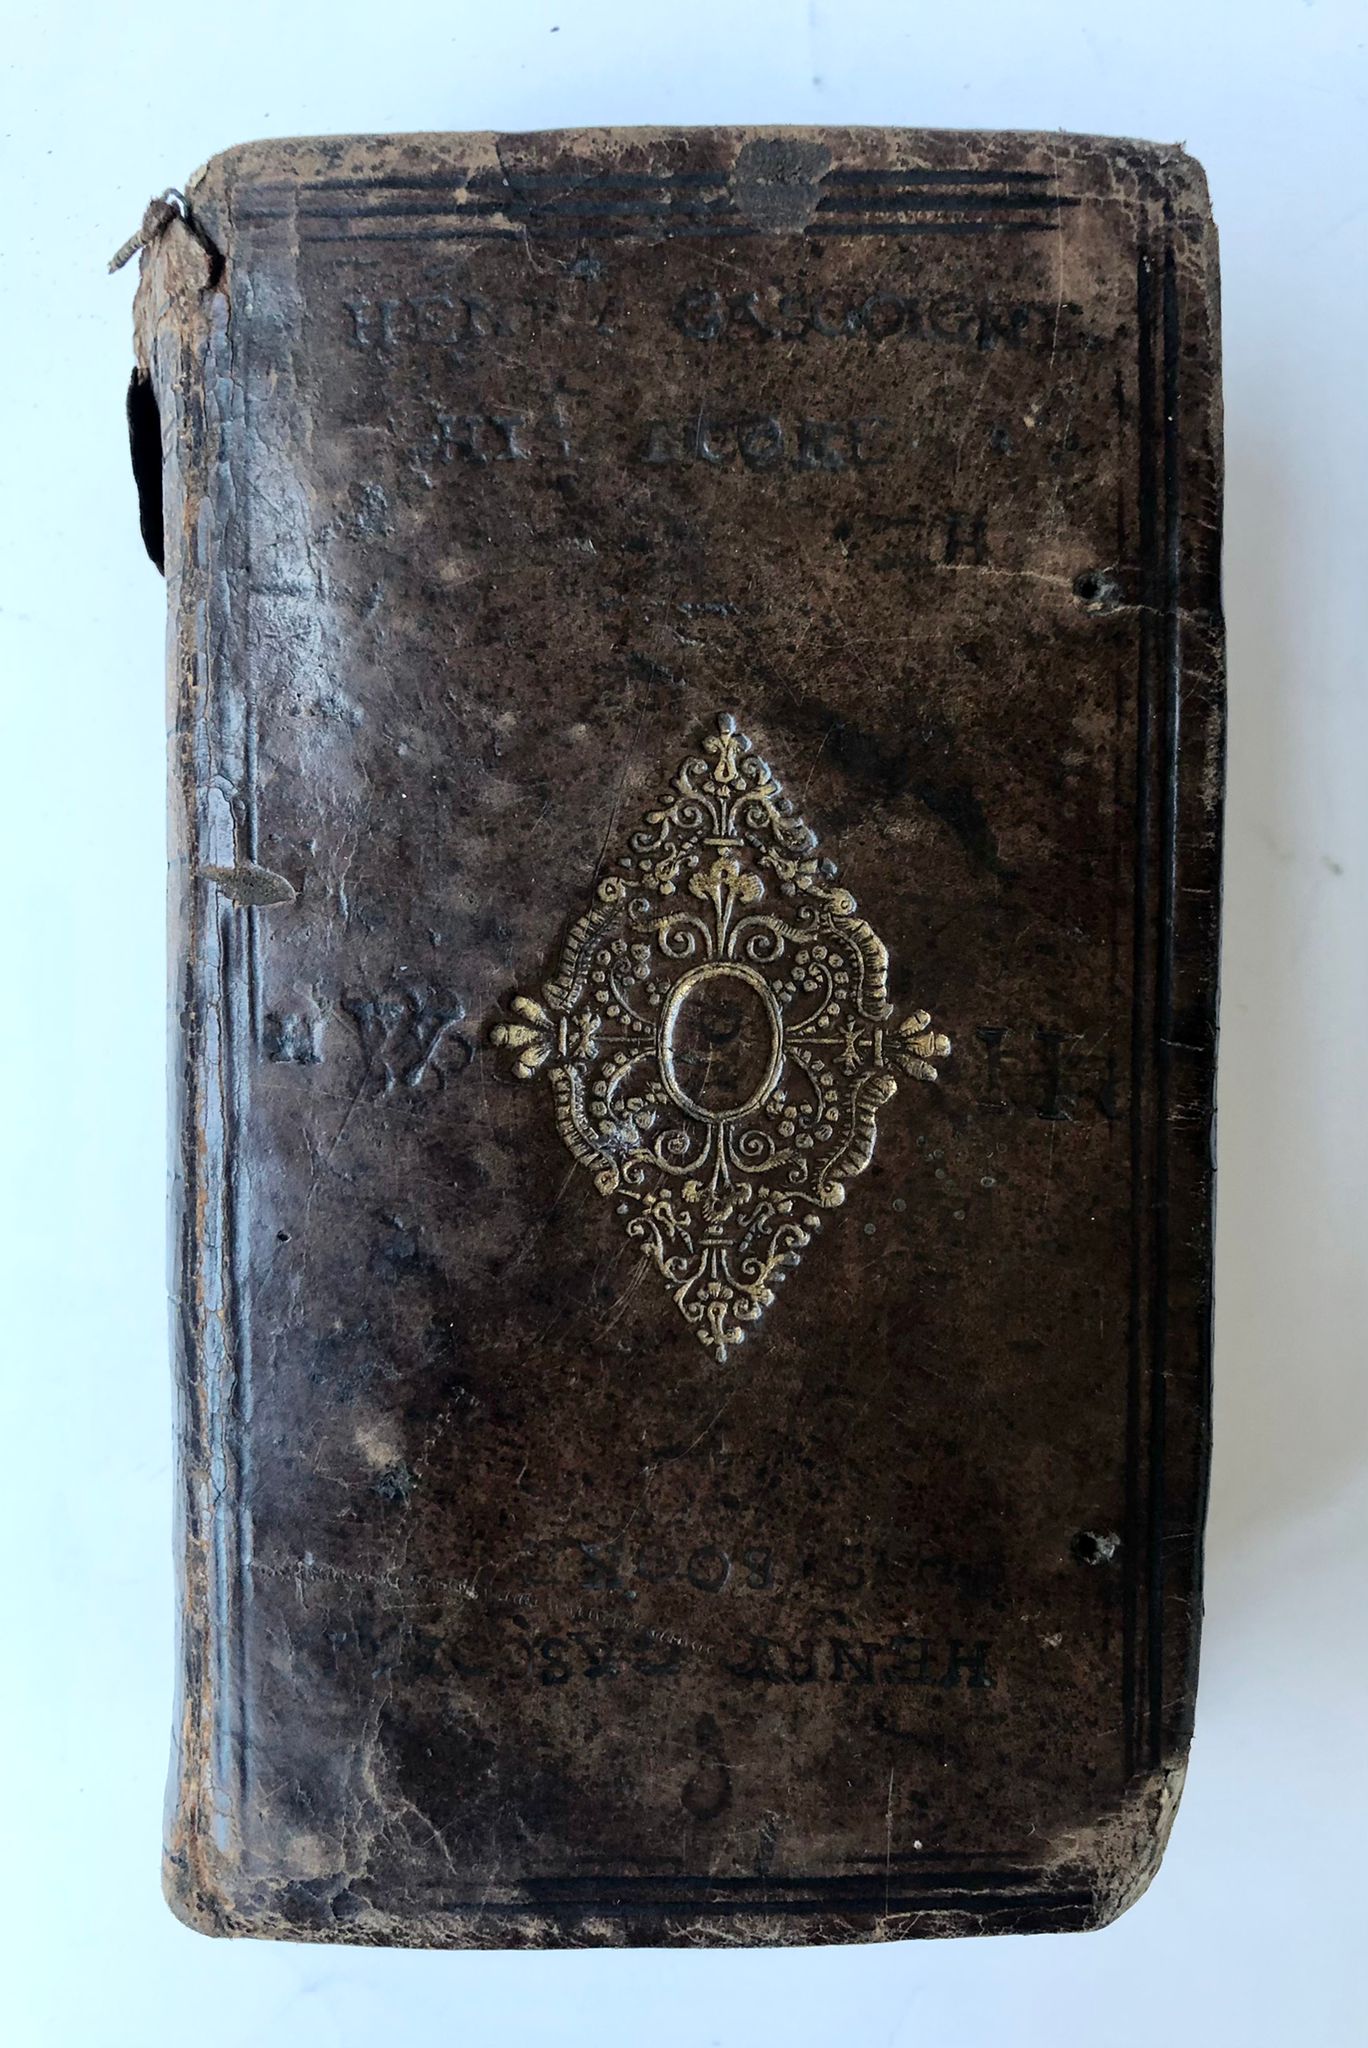 [Bible, 18th century, Gascoigne] 18th century bible, partly damaged, in full leather binding with on the front: 'Henry Gascoigne his book' in goldprint.